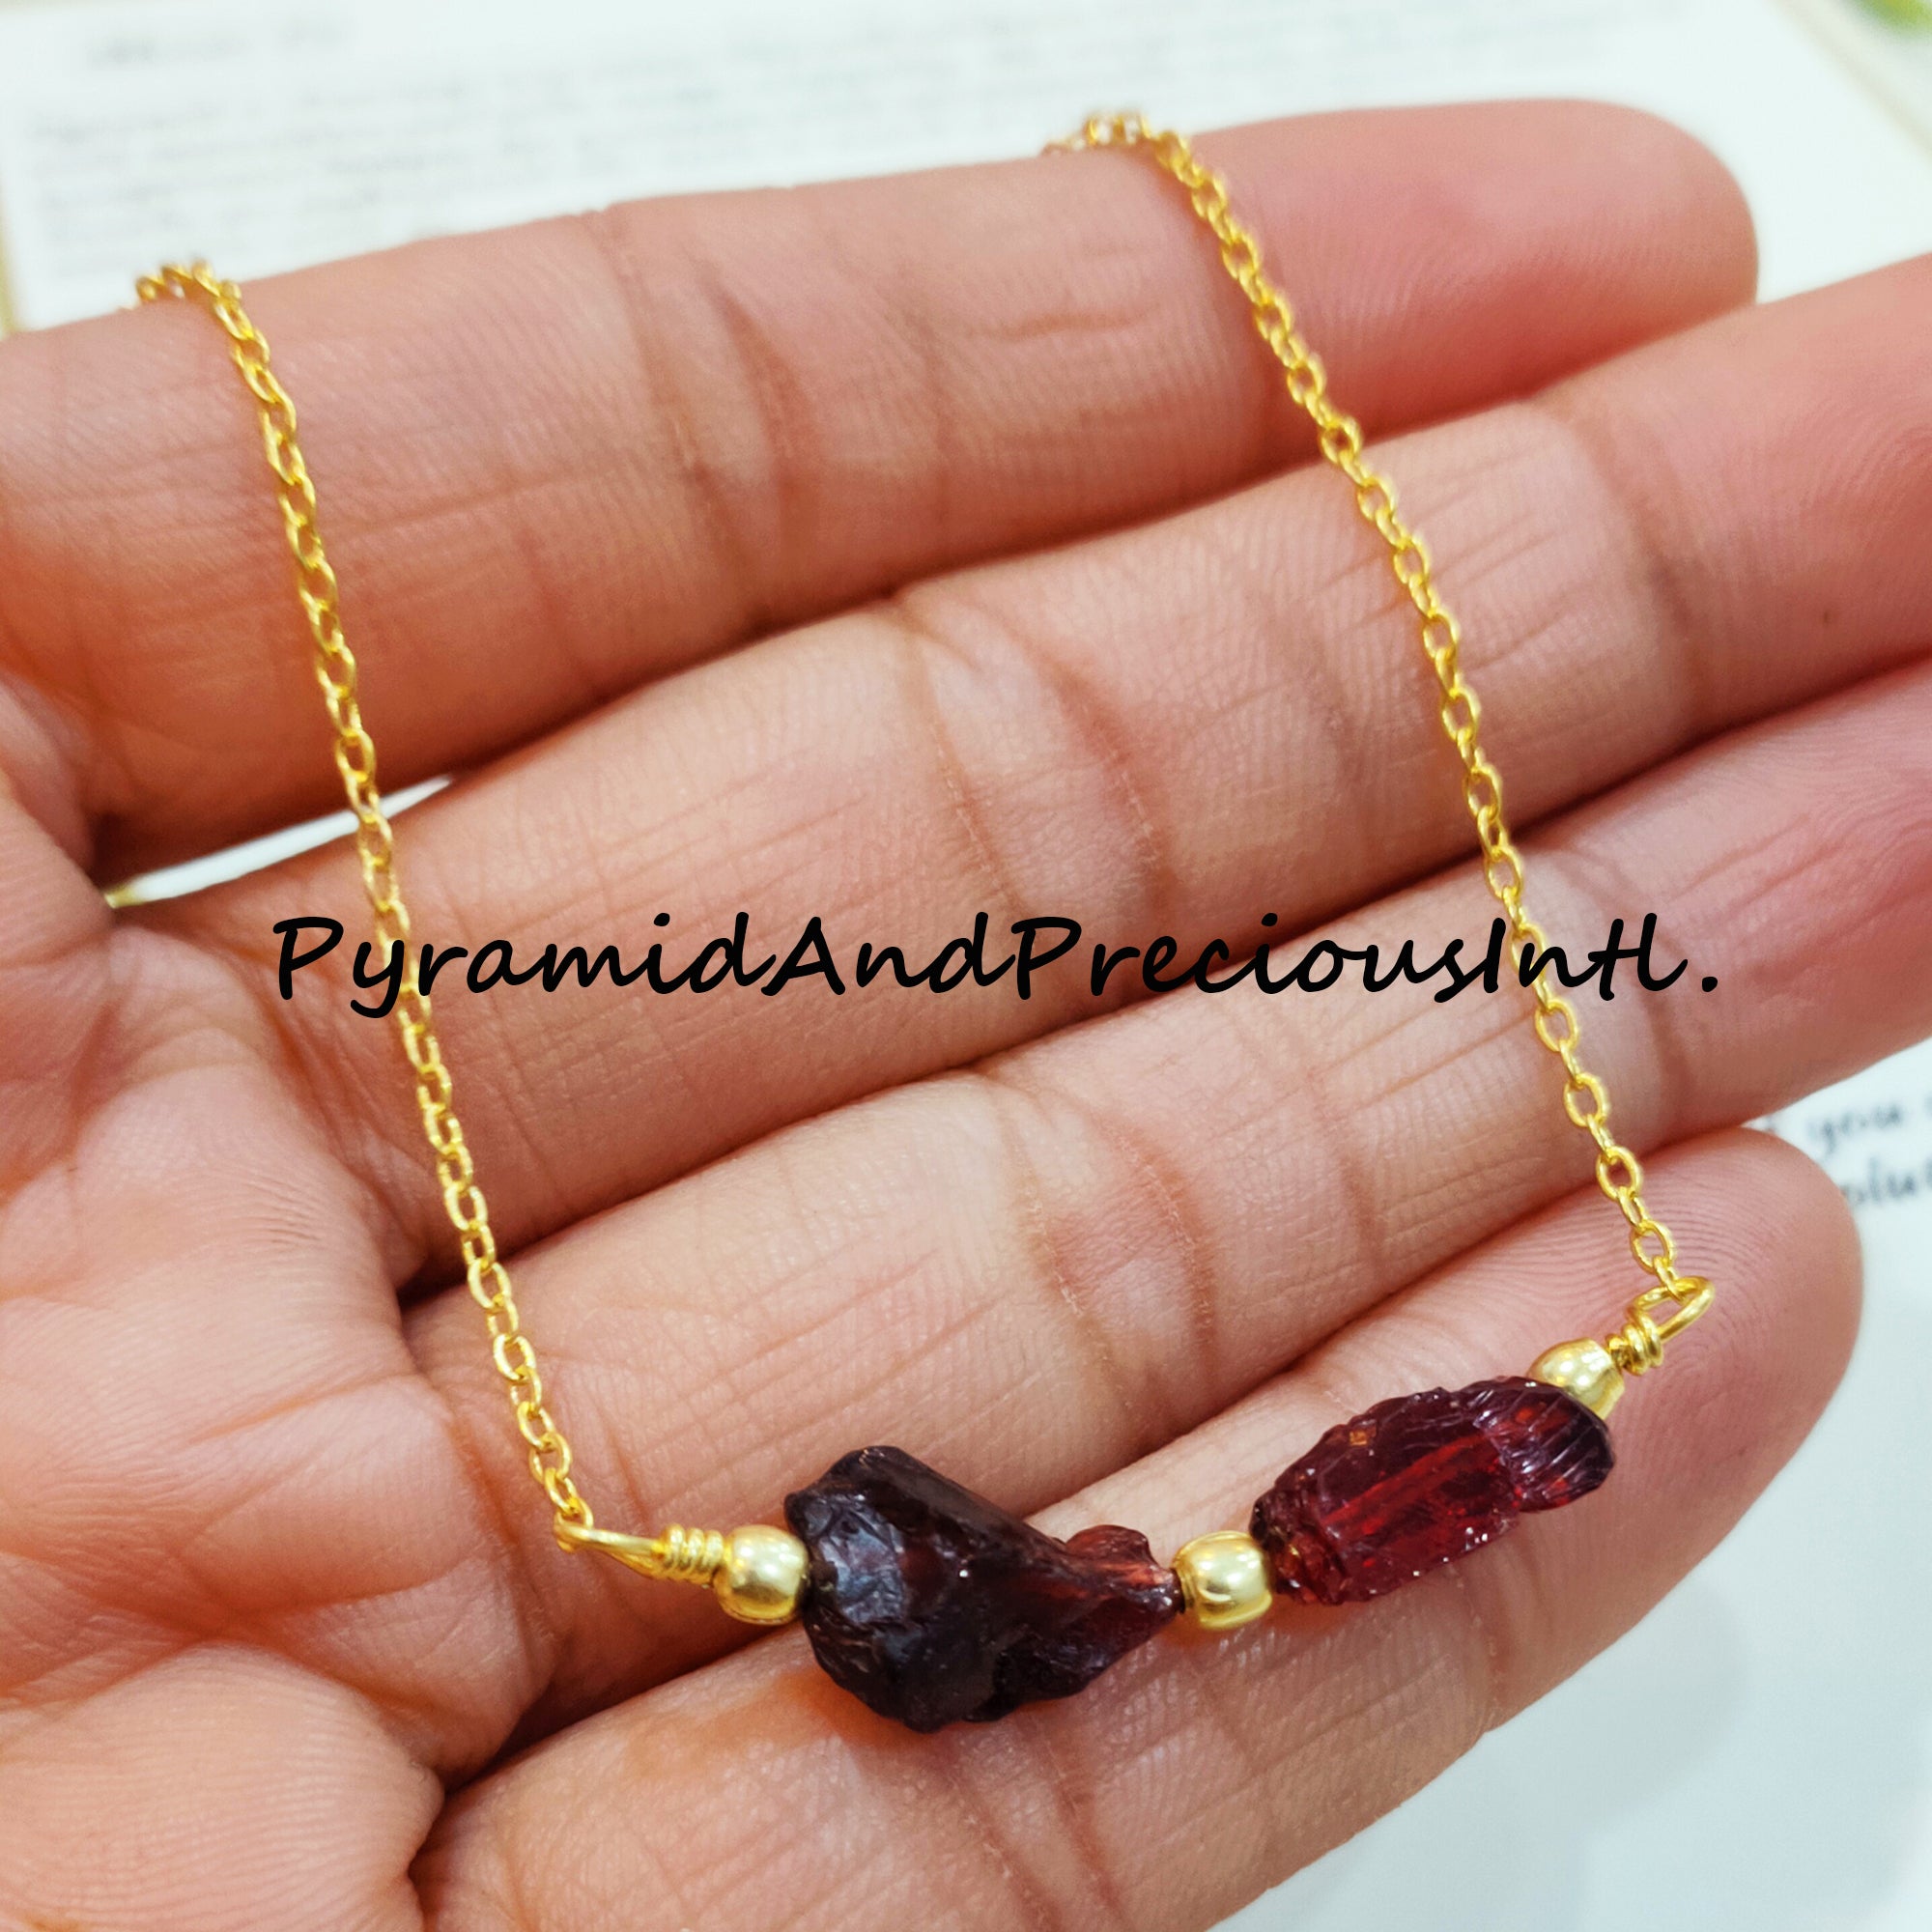 Natural Raw Garnet Gold Plated Necklace, Healing Necklace, January Birthstone